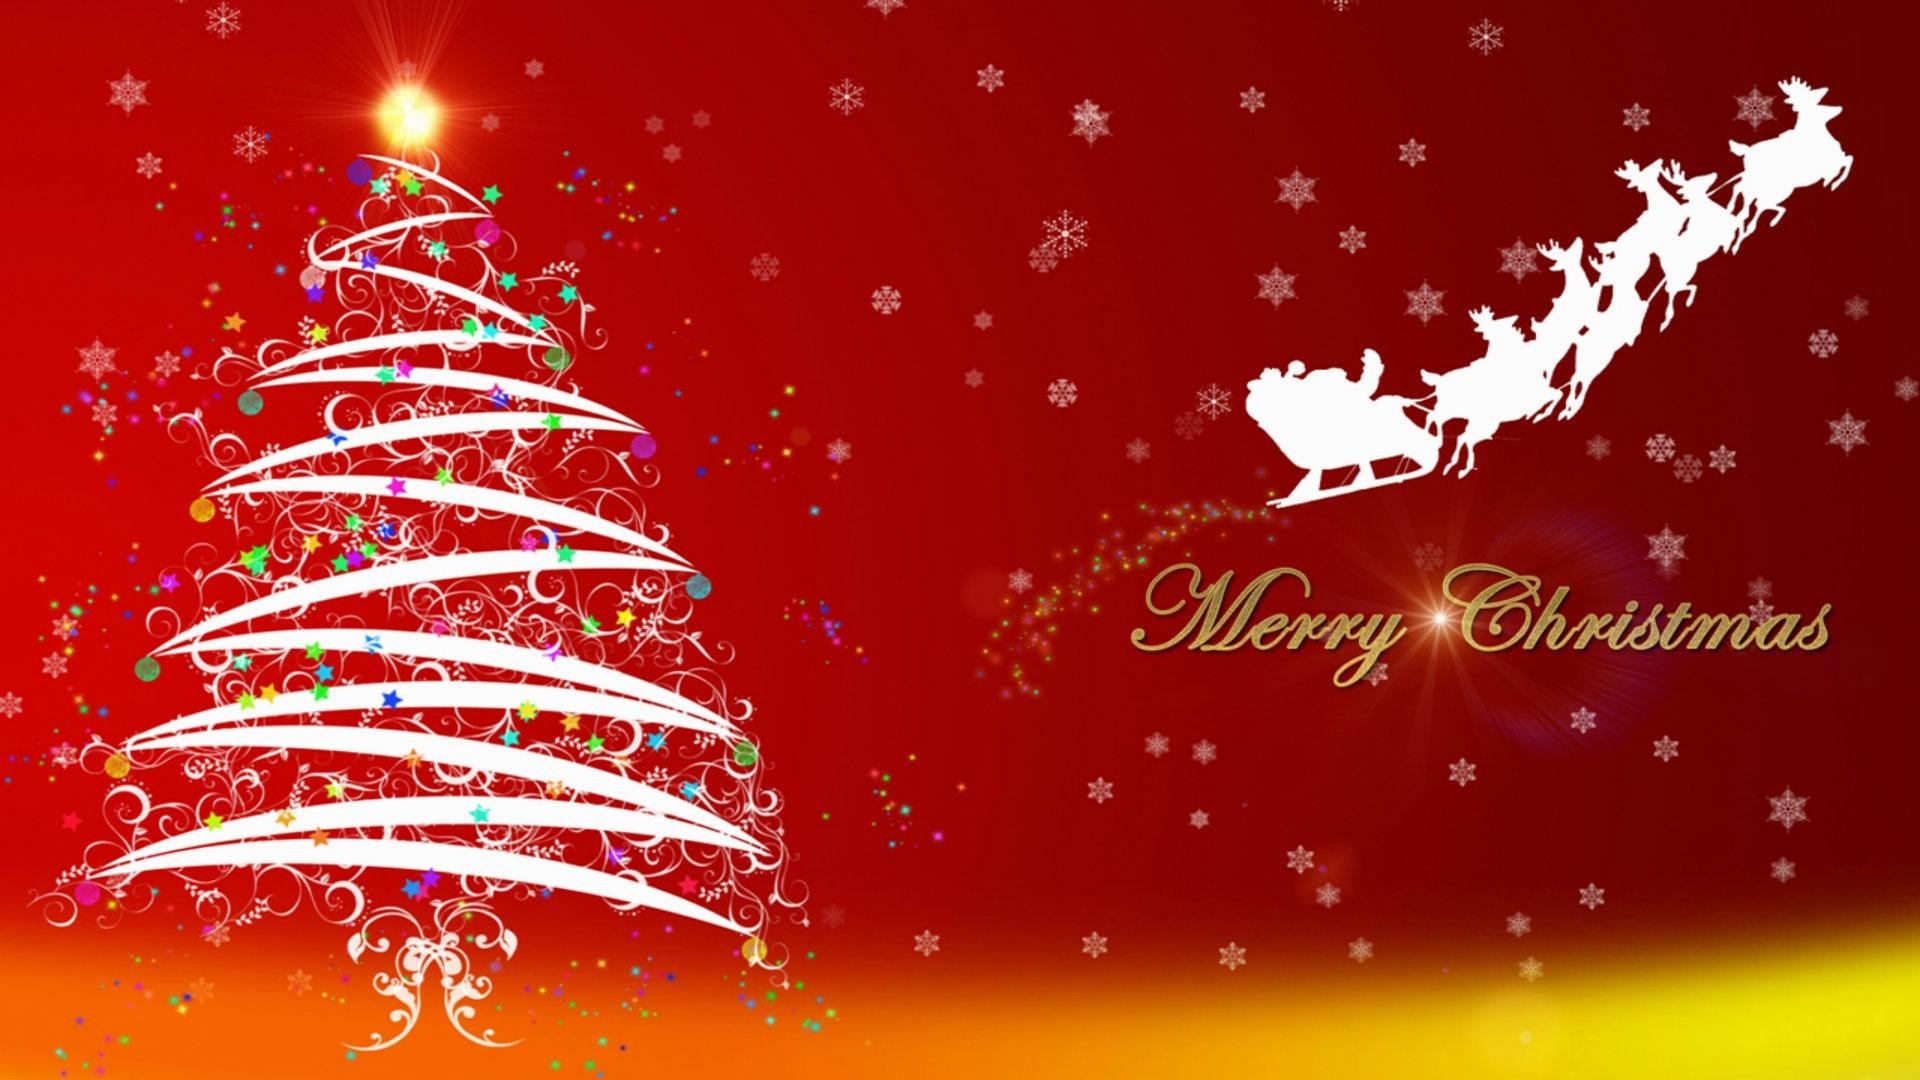 1920x1080  6. christmas-wallpapers-High-Resolution-Download6-600x338